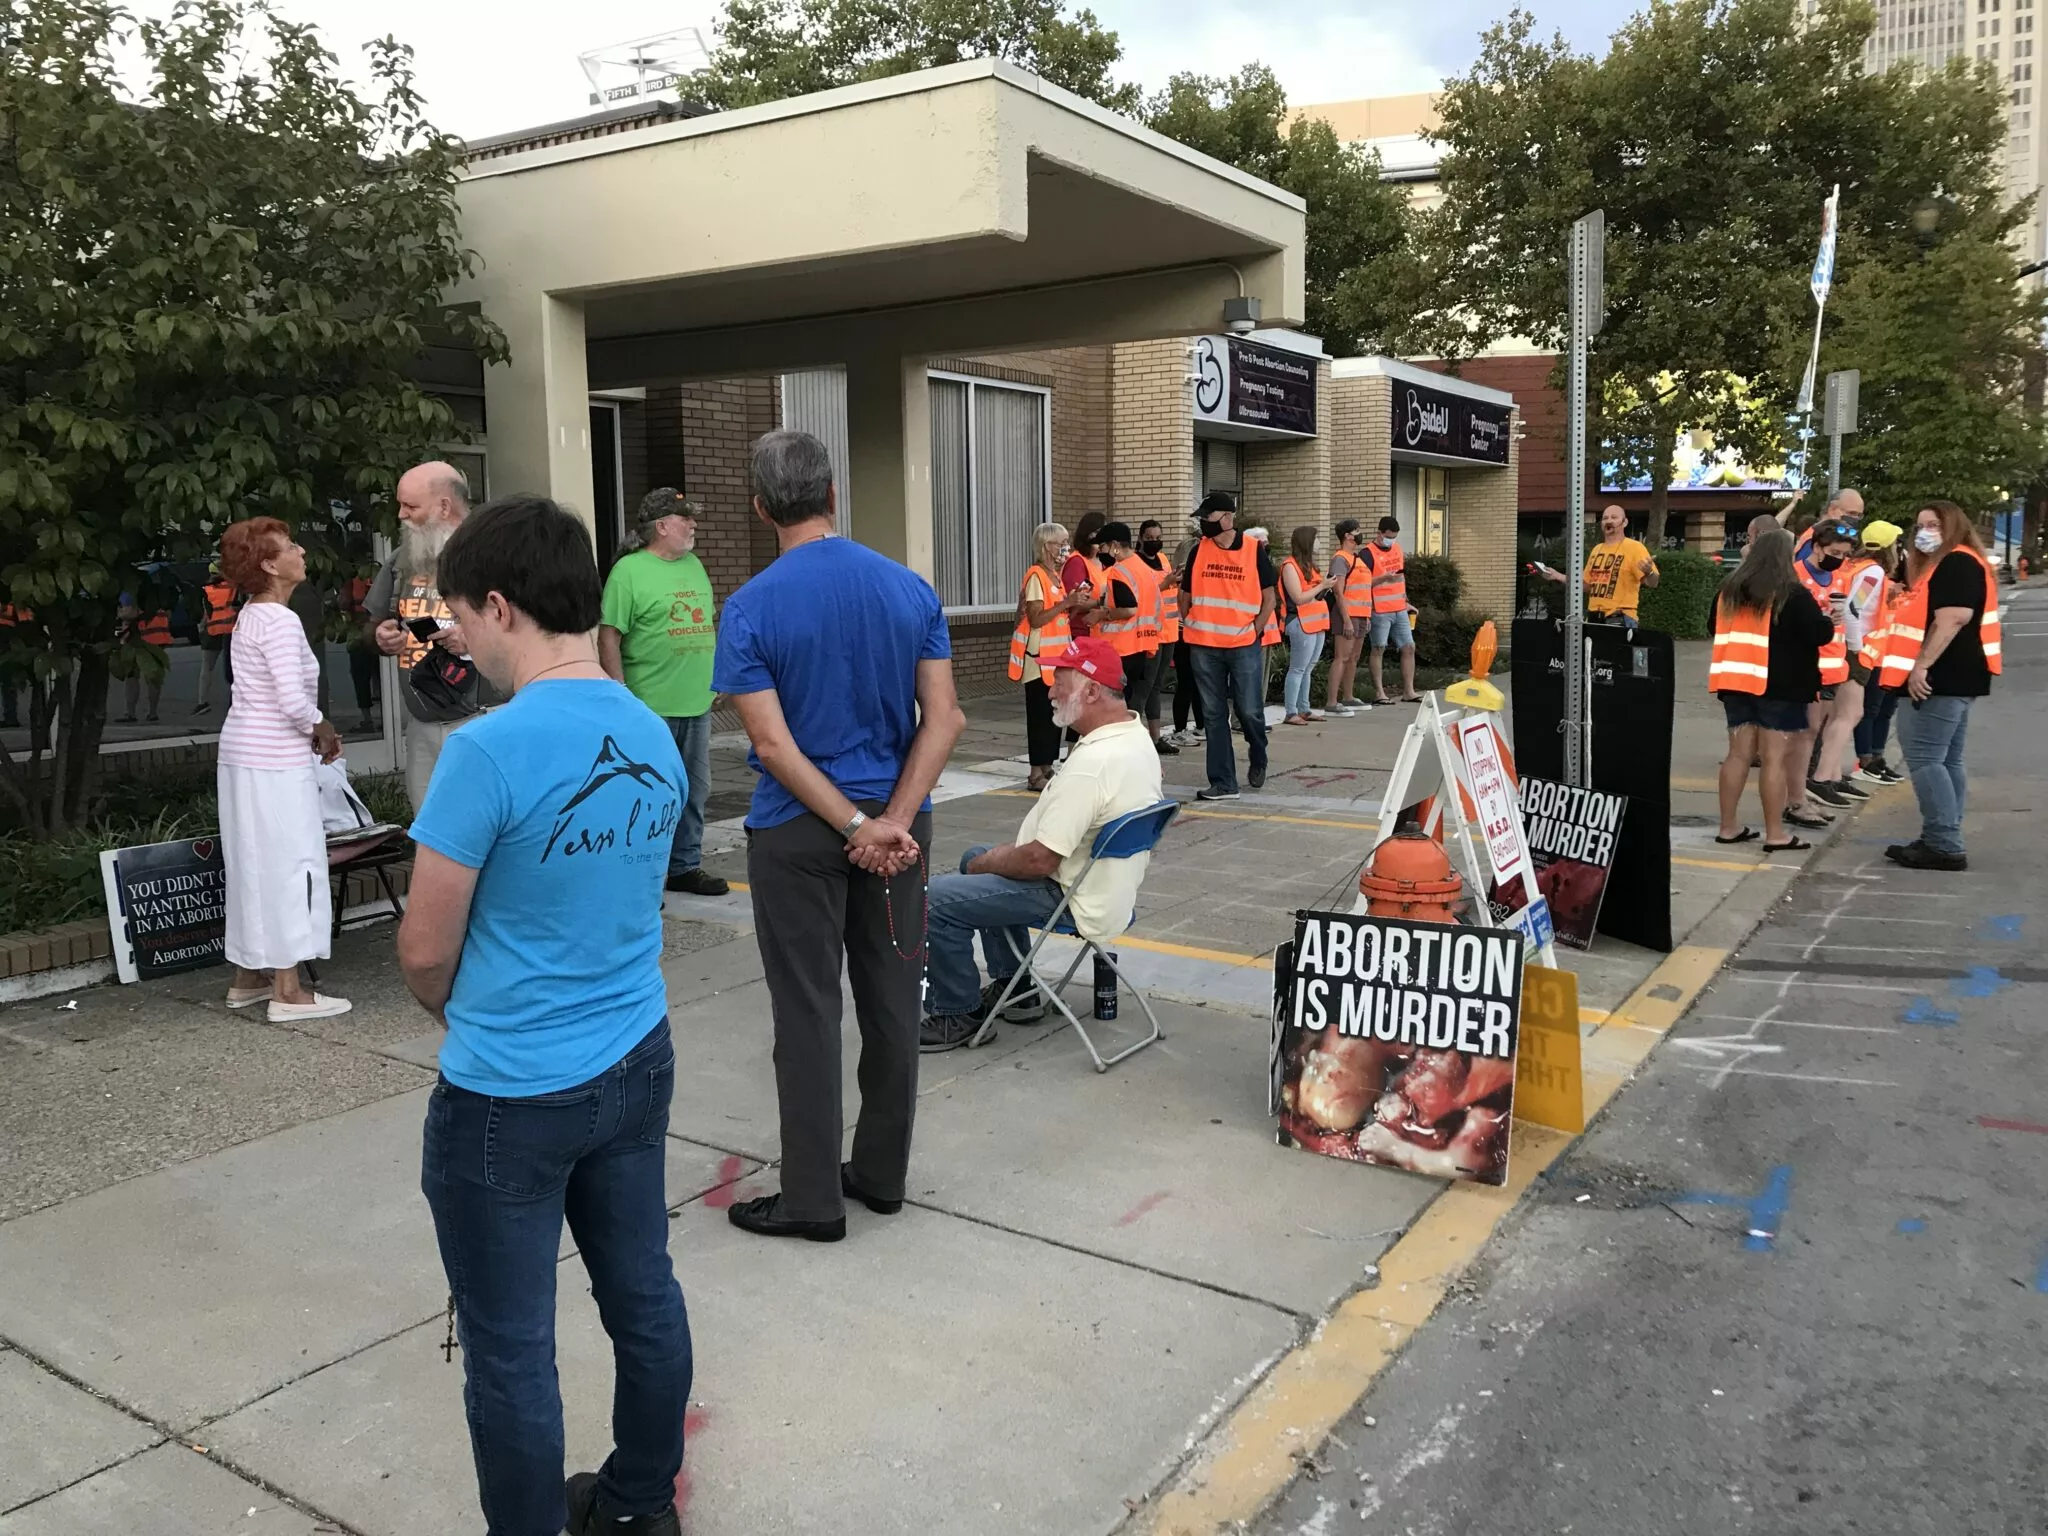 Patients still call Kentucky abortion providers as advocates struggle to find a legal path forward